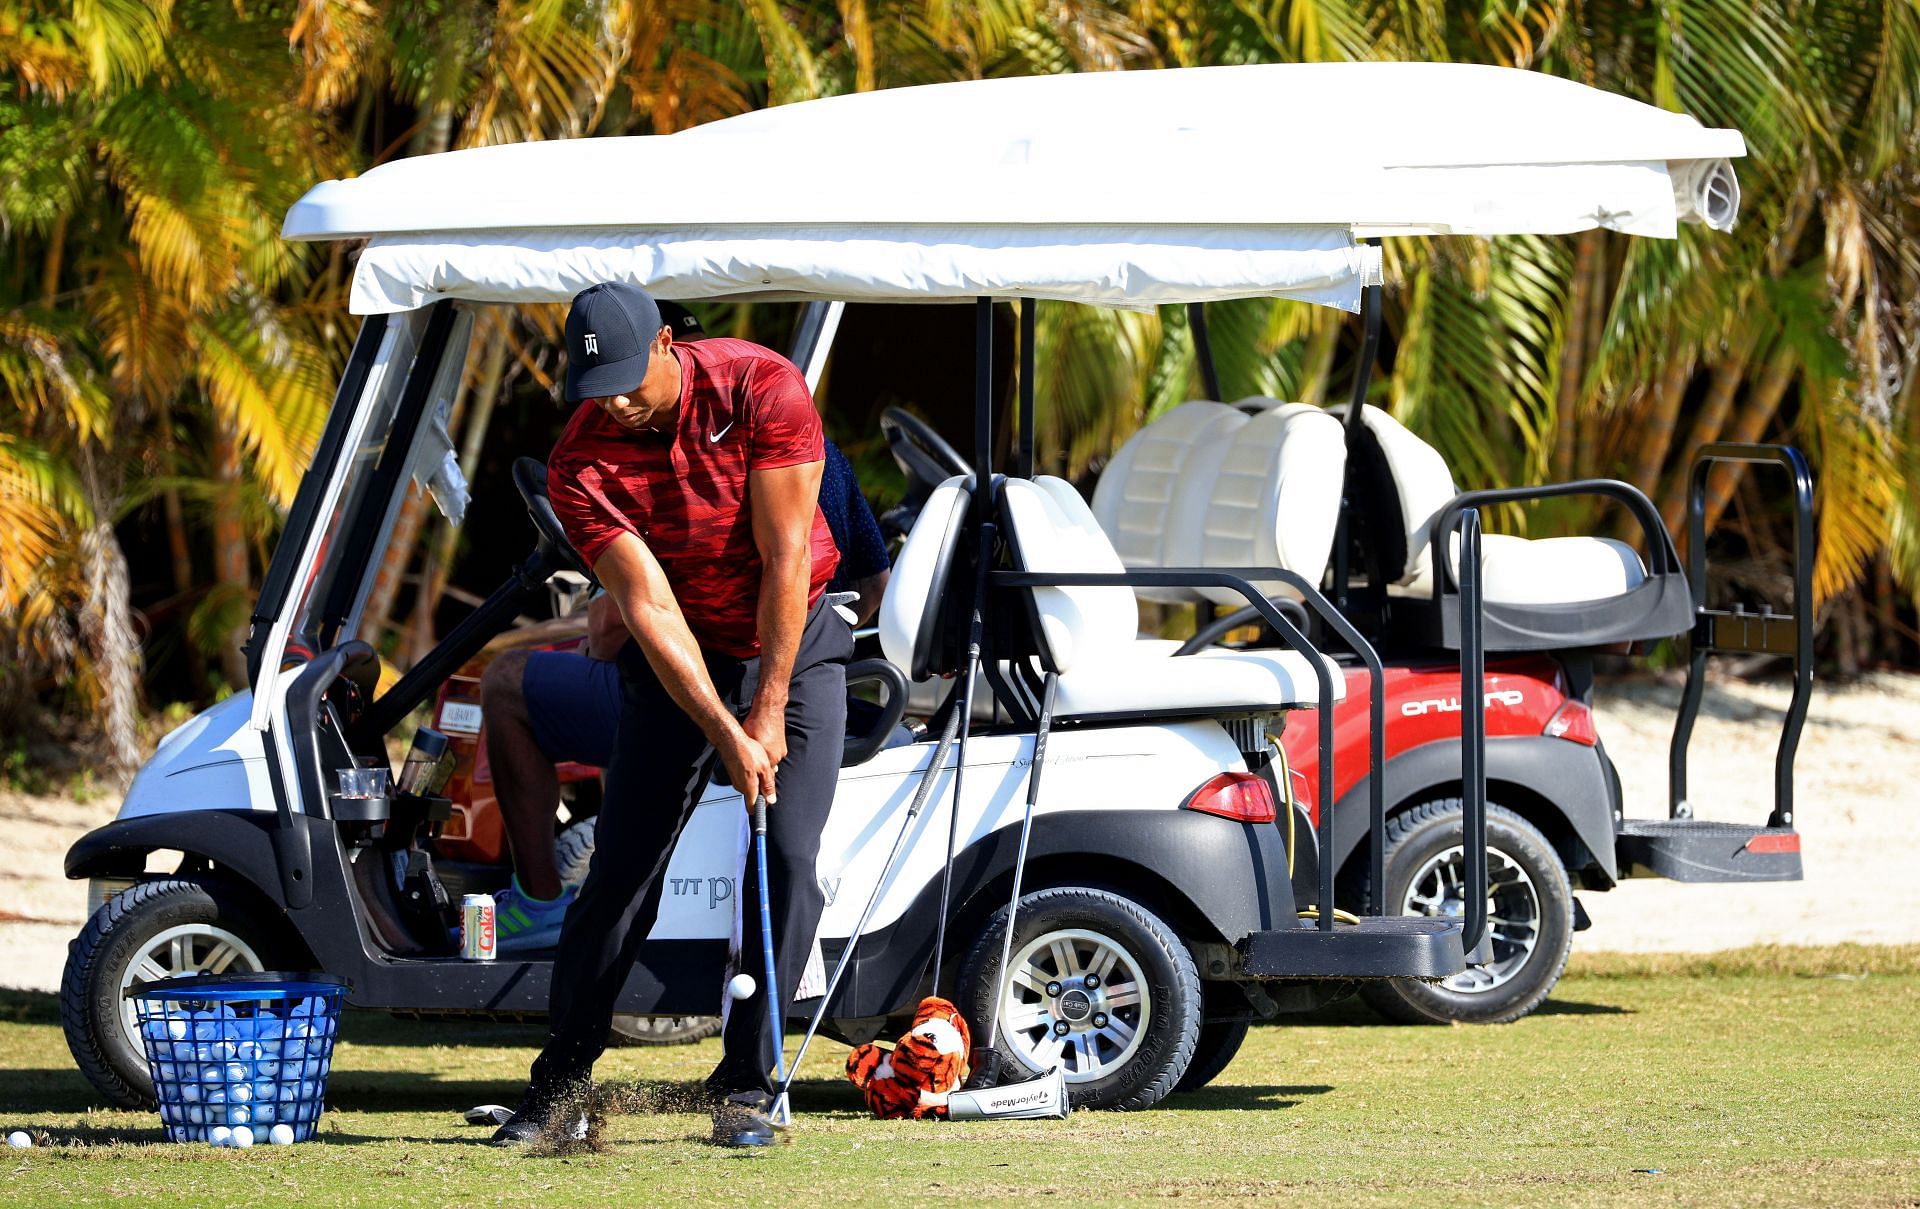 Tiger Woods at the Hero World Challenge - Final Round (Image via Mike Ehrmann/Getty Images)